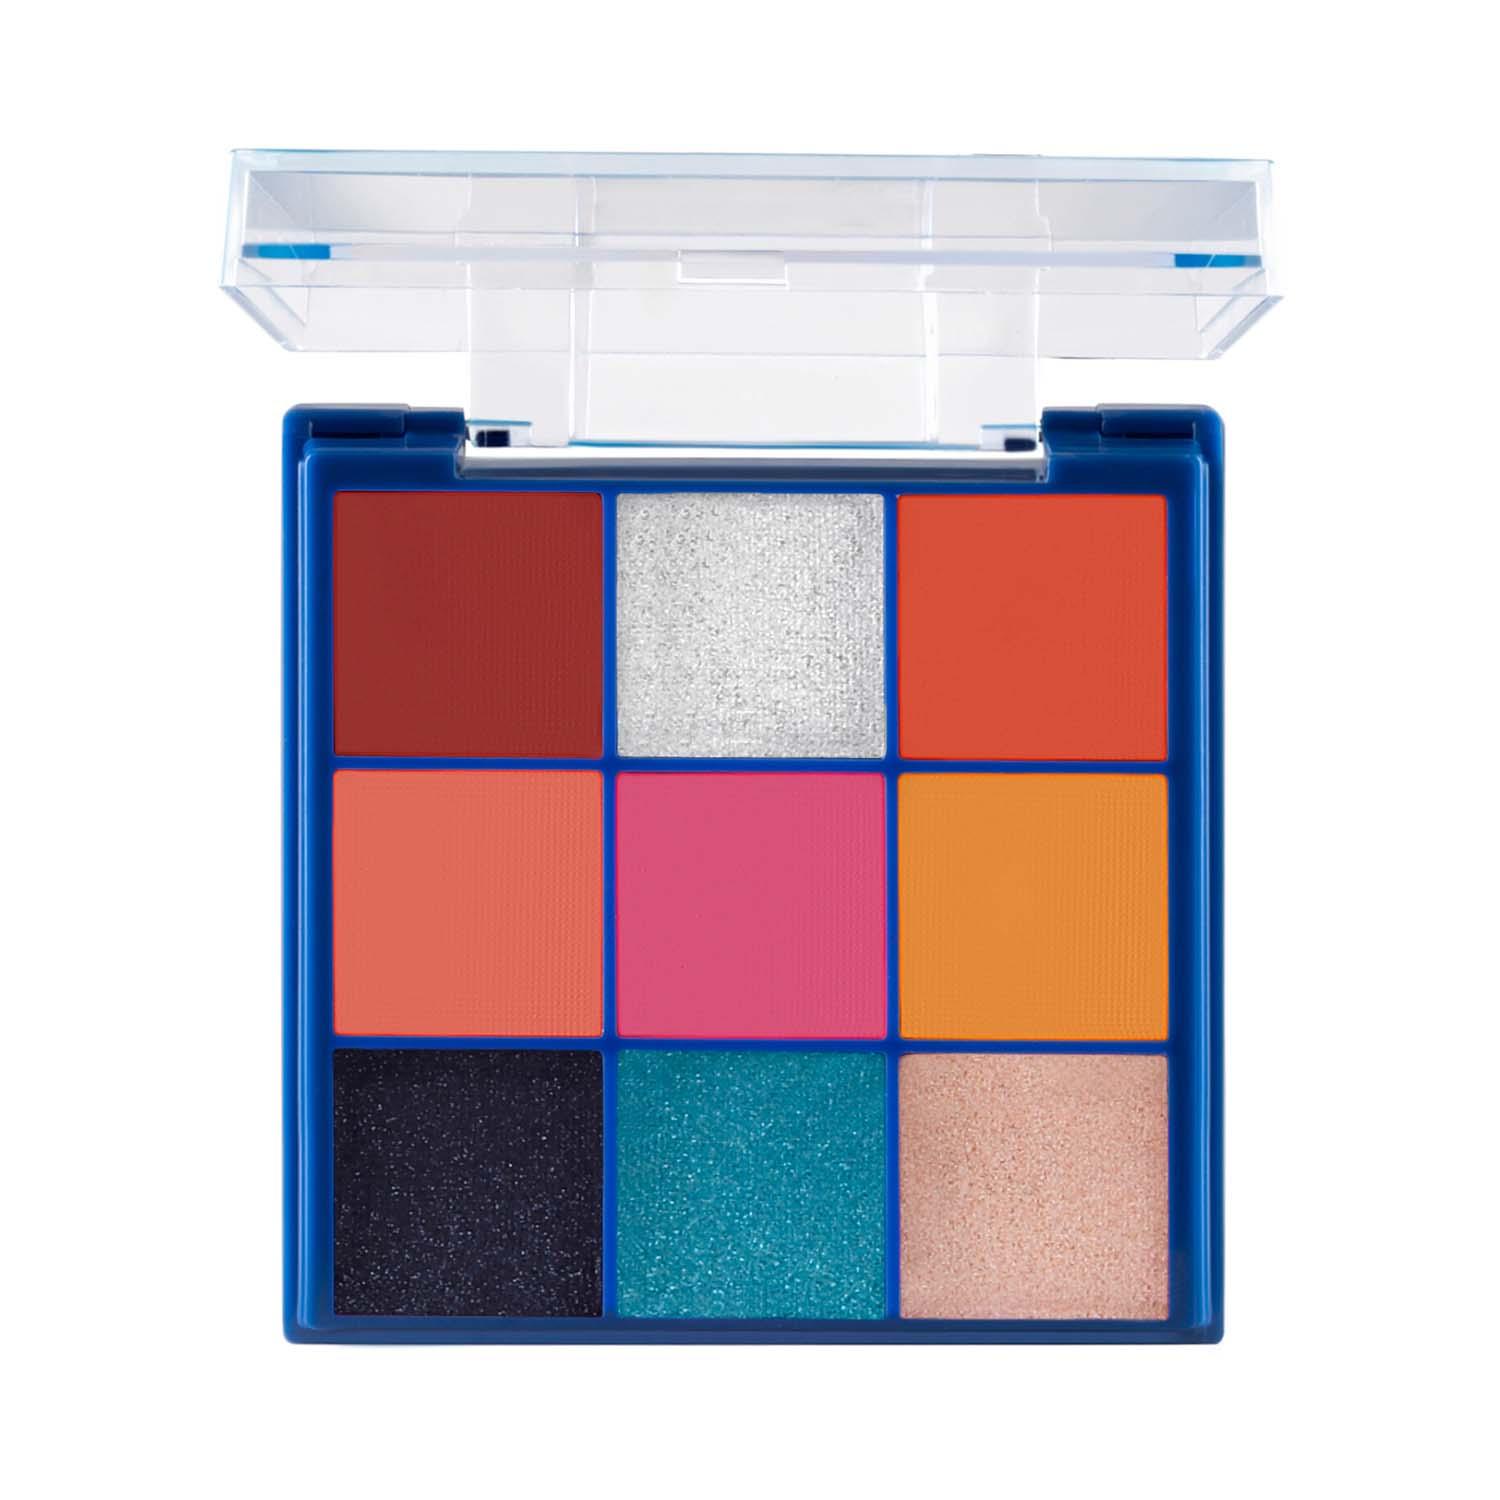 MARS | MARS Makeup Kit With 9 Highly Pigmented Eyeshadows, Blusher And Highlighter - 02 (16g)